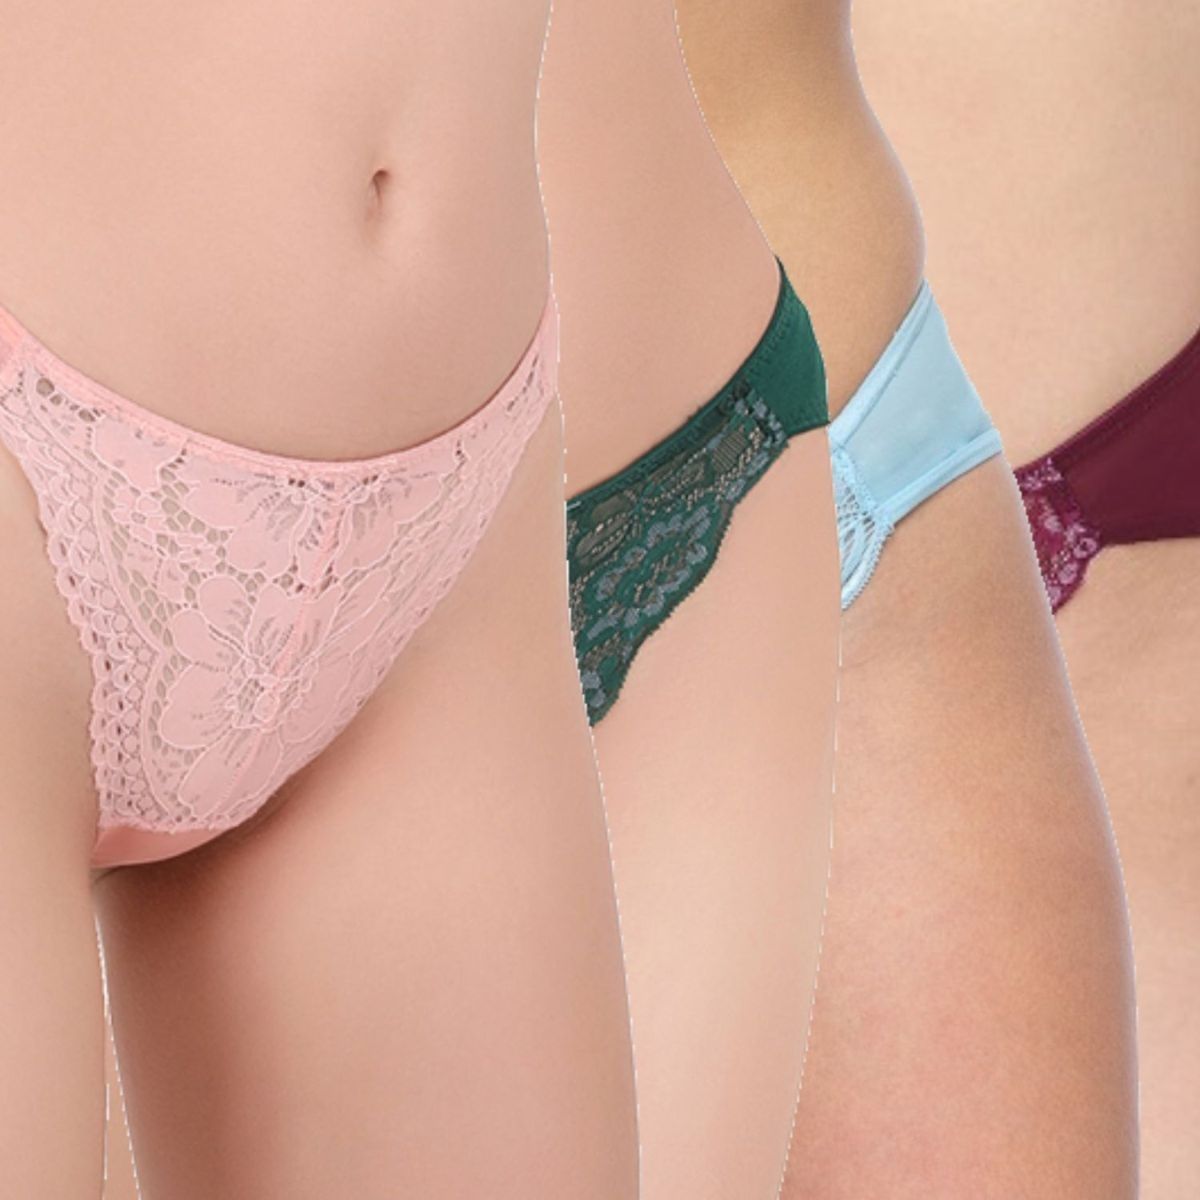 Buy Curwish Lacy Wonders - Lace Panty - Multi-color (Pack of 4) Online